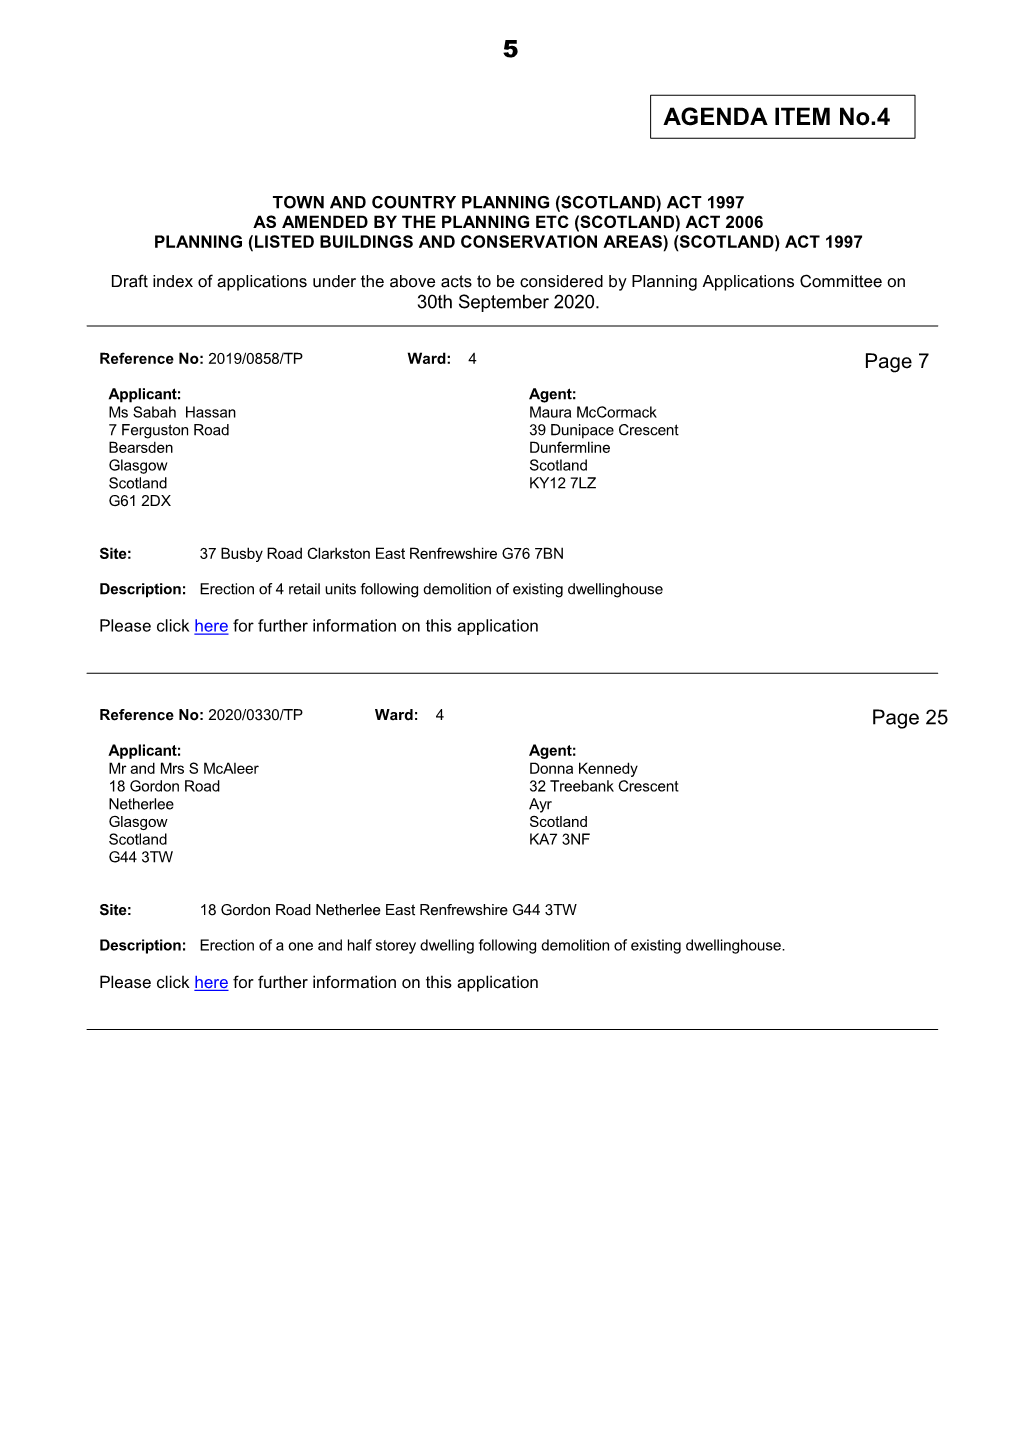 Planning Applications Committee Item 04